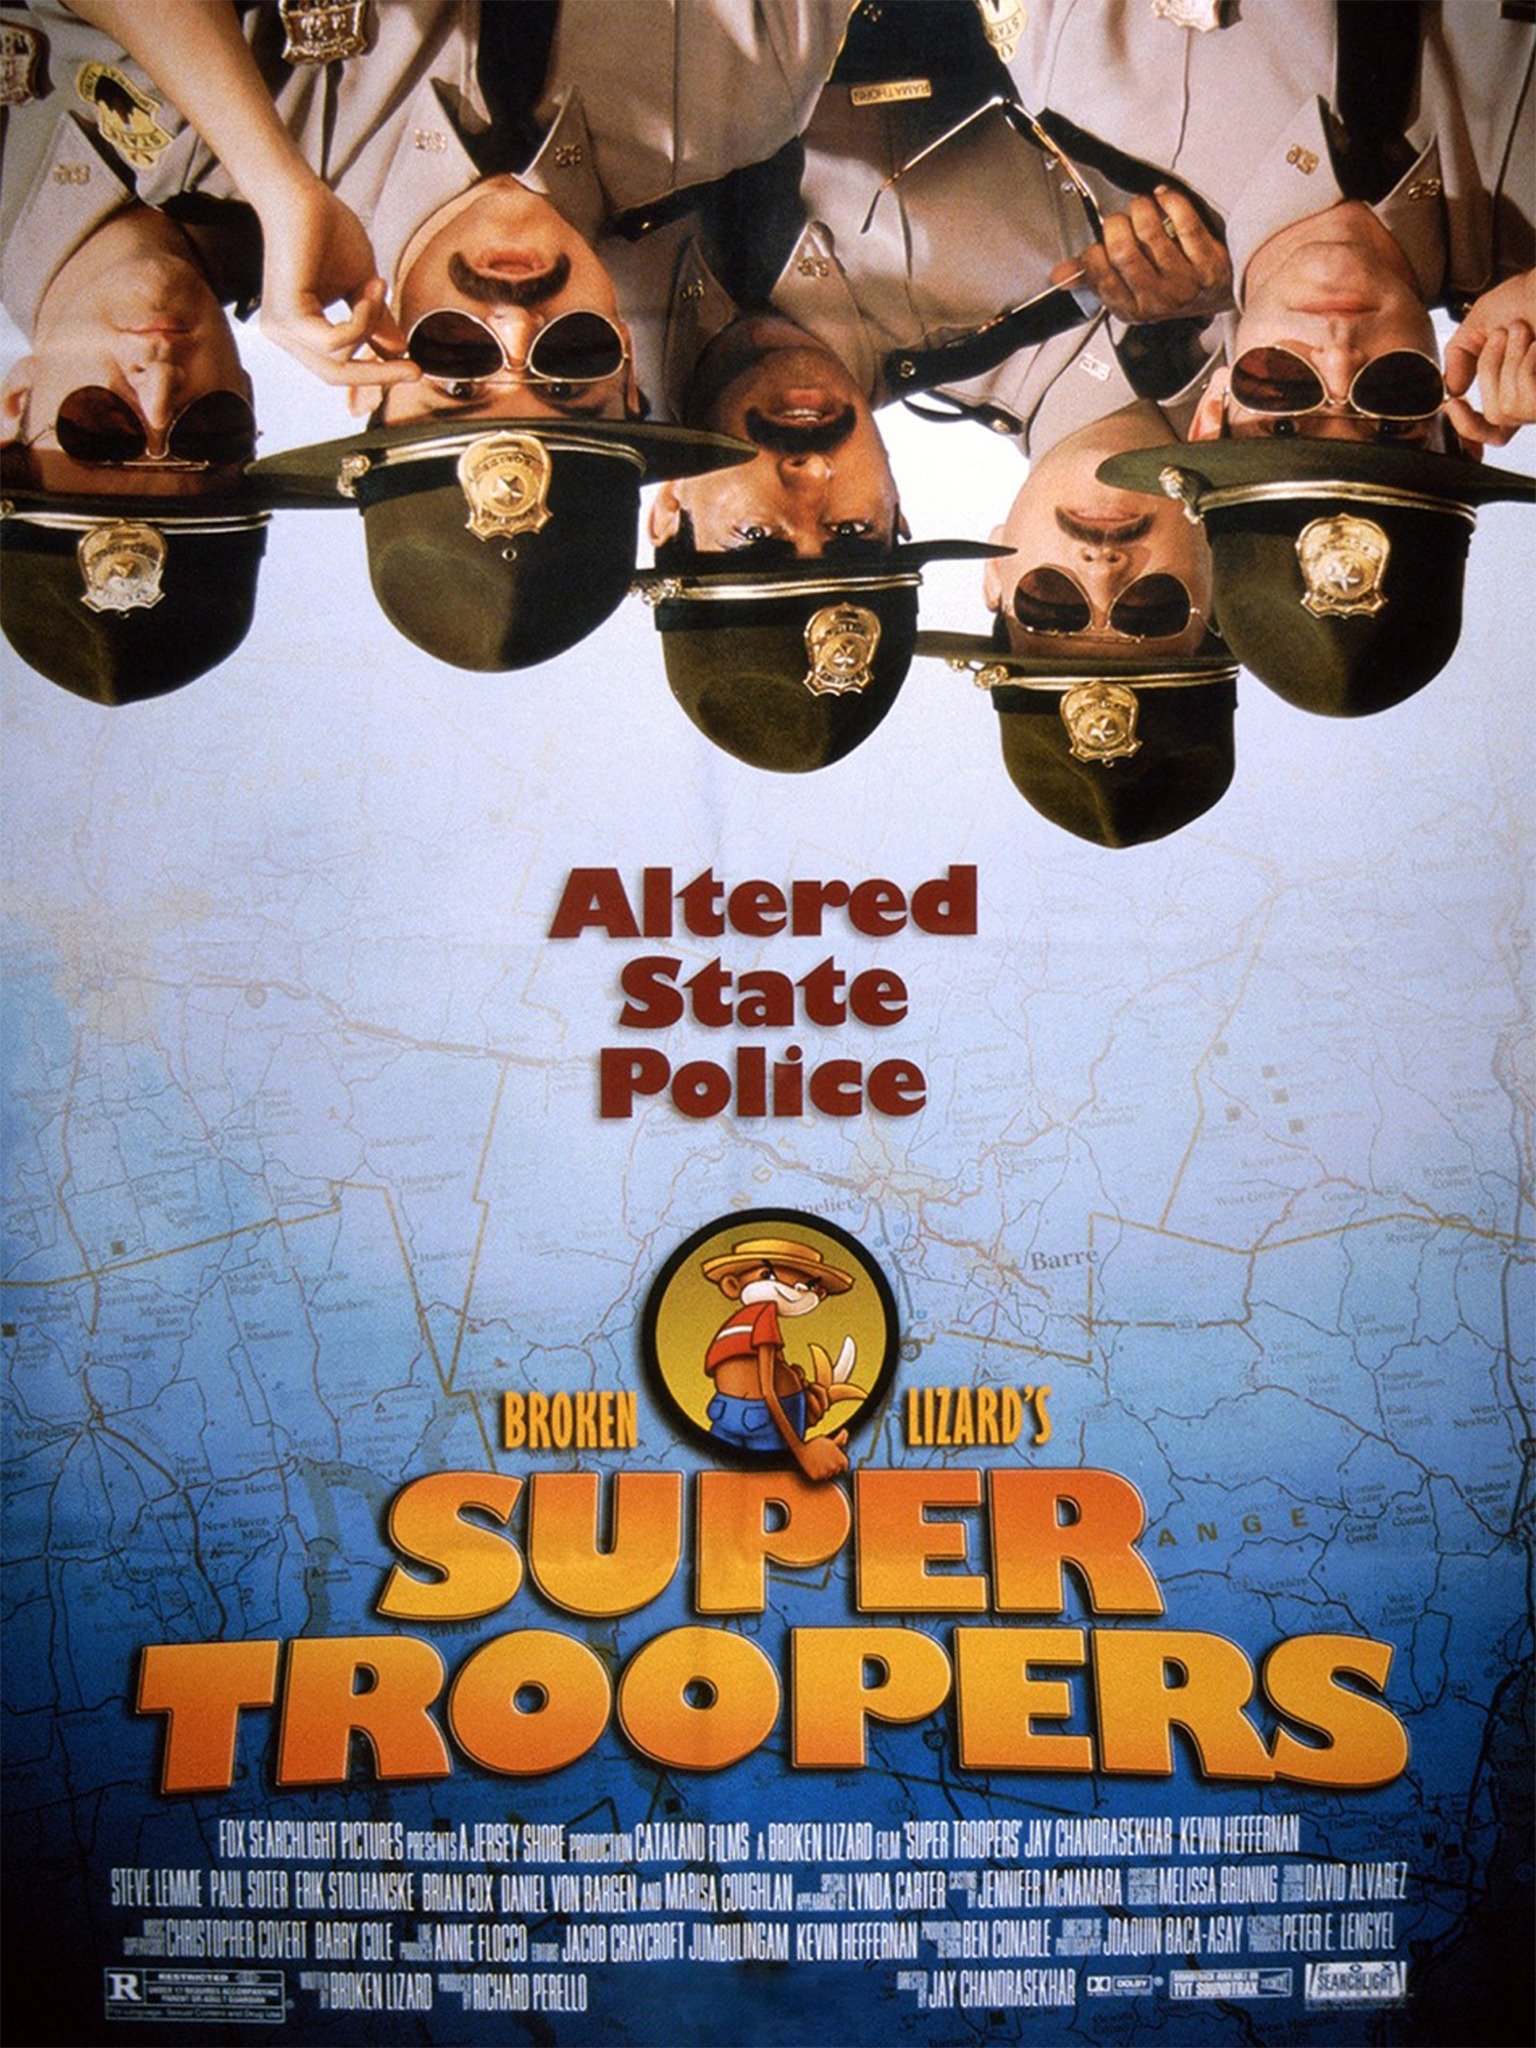 Super Troopers (2001) - Rotten Tomatoes